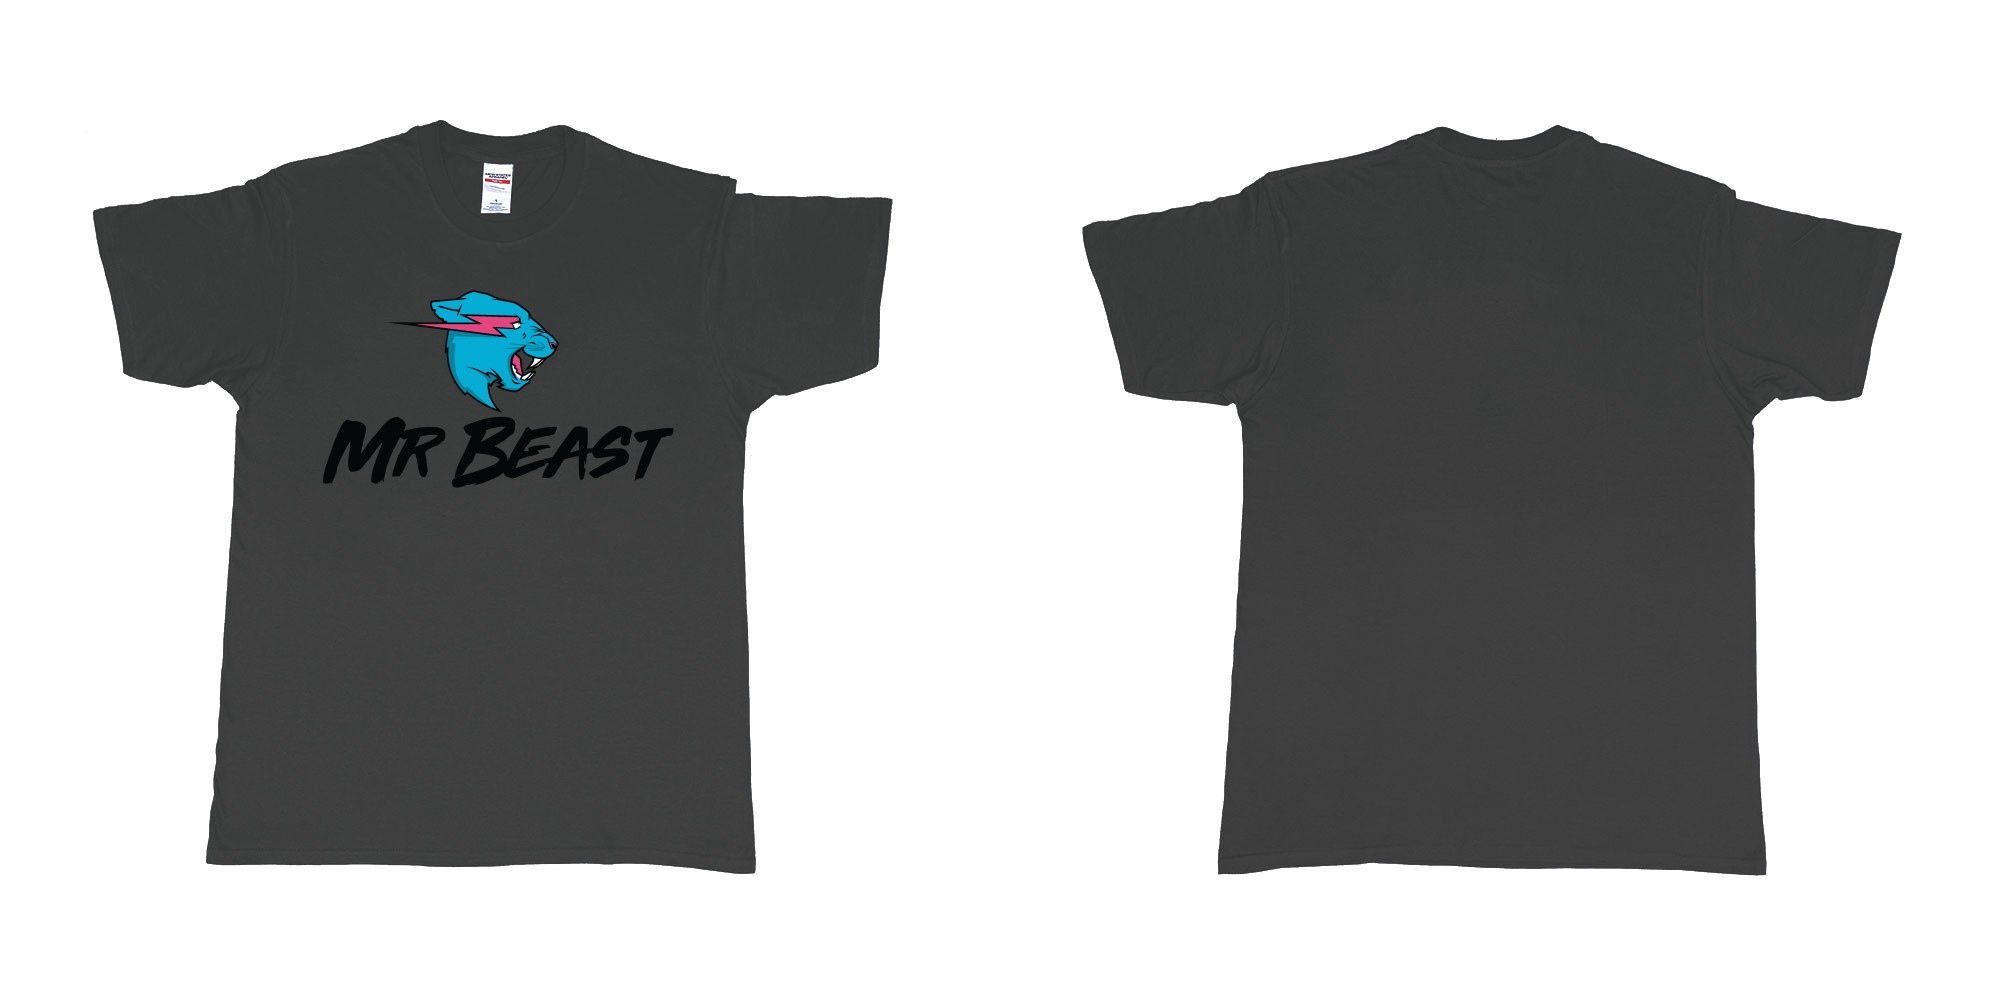 Custom tshirt design mr beast logo in fabric color black choice your own text made in Bali by The Pirate Way